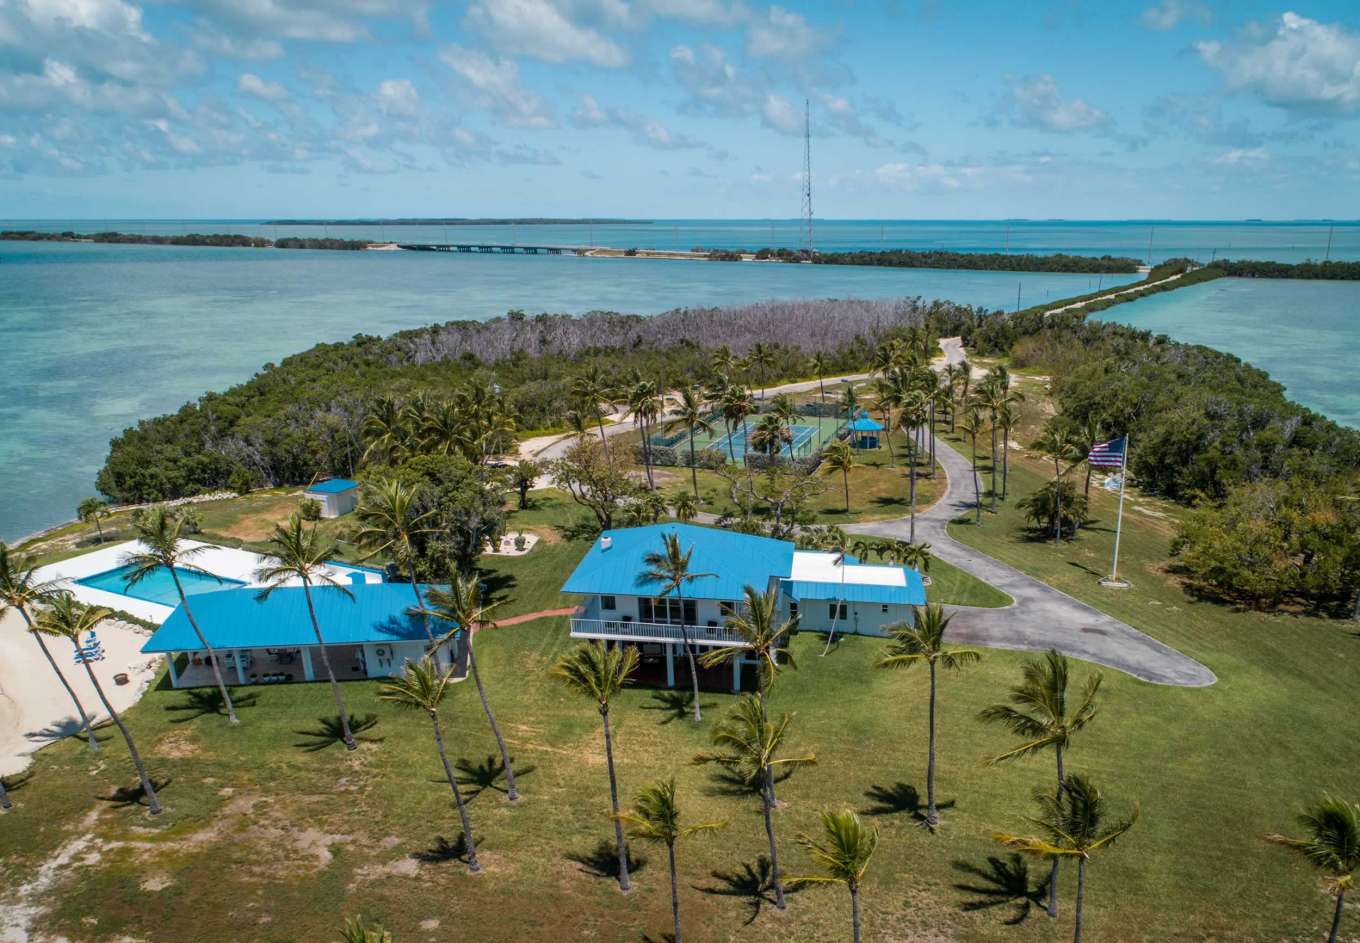 Terra S Key Florida United States Private Islands For Sale